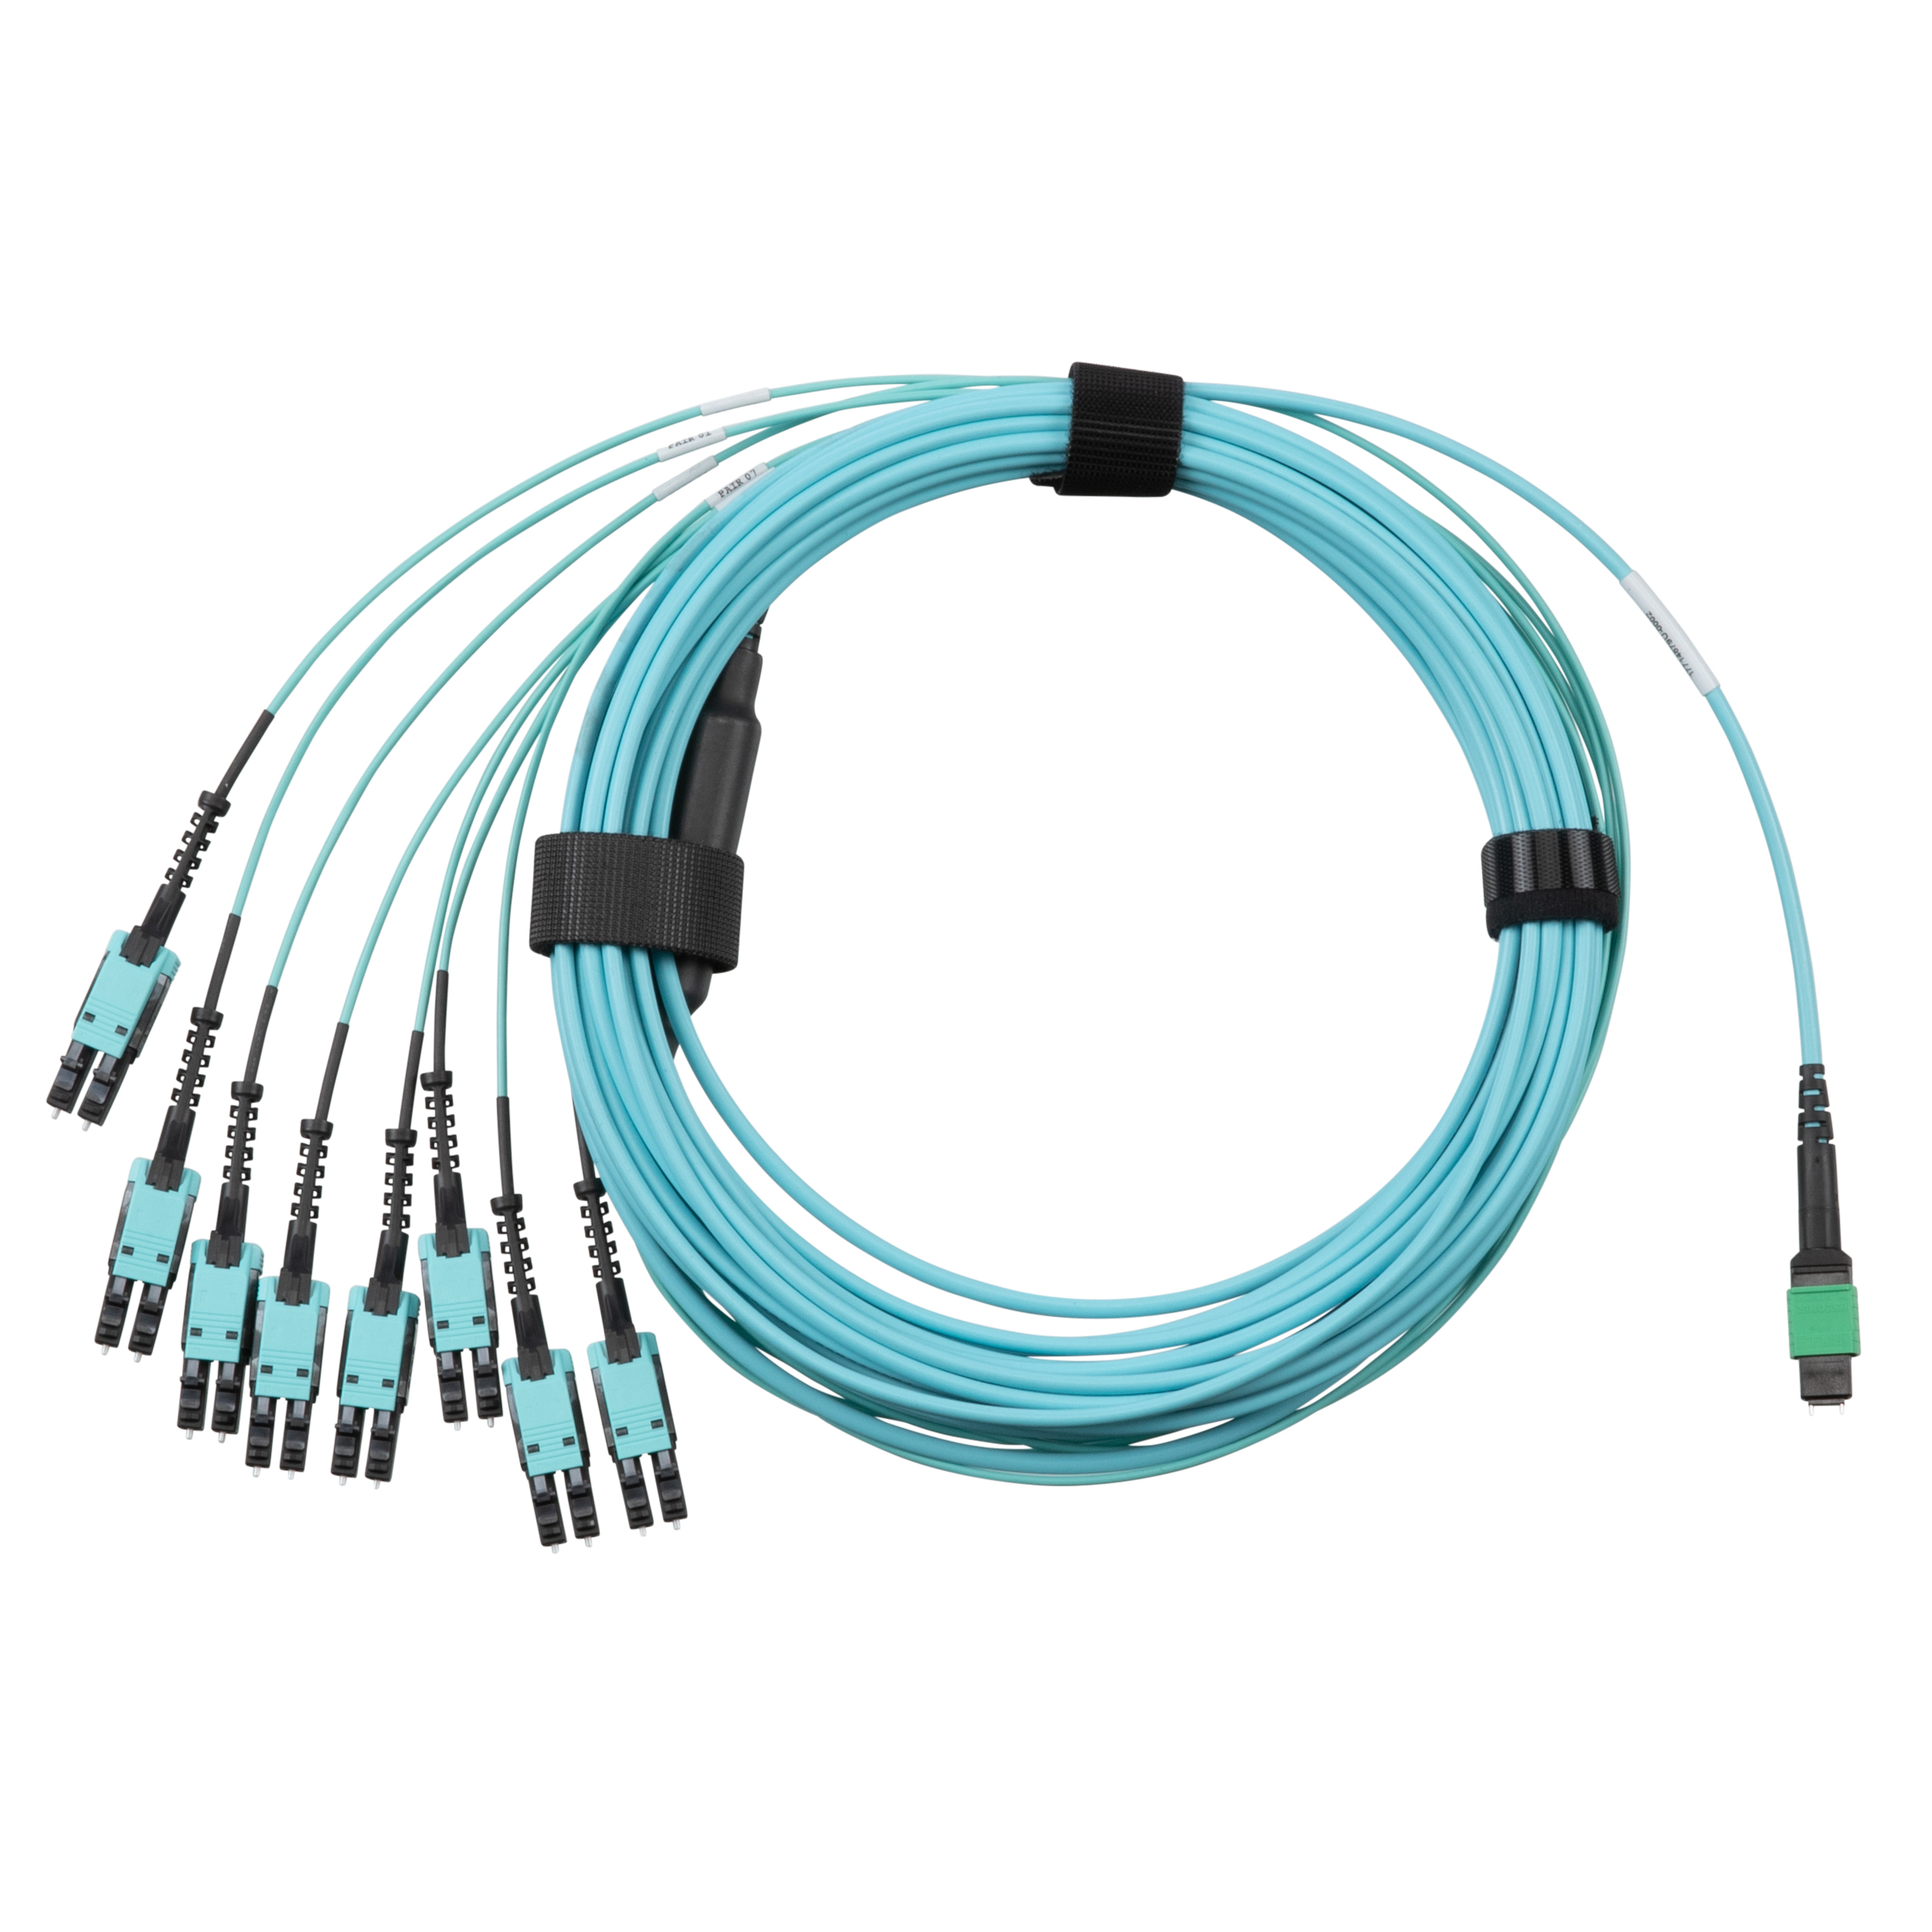 A picture of the OM4 16-Fiber Harness.